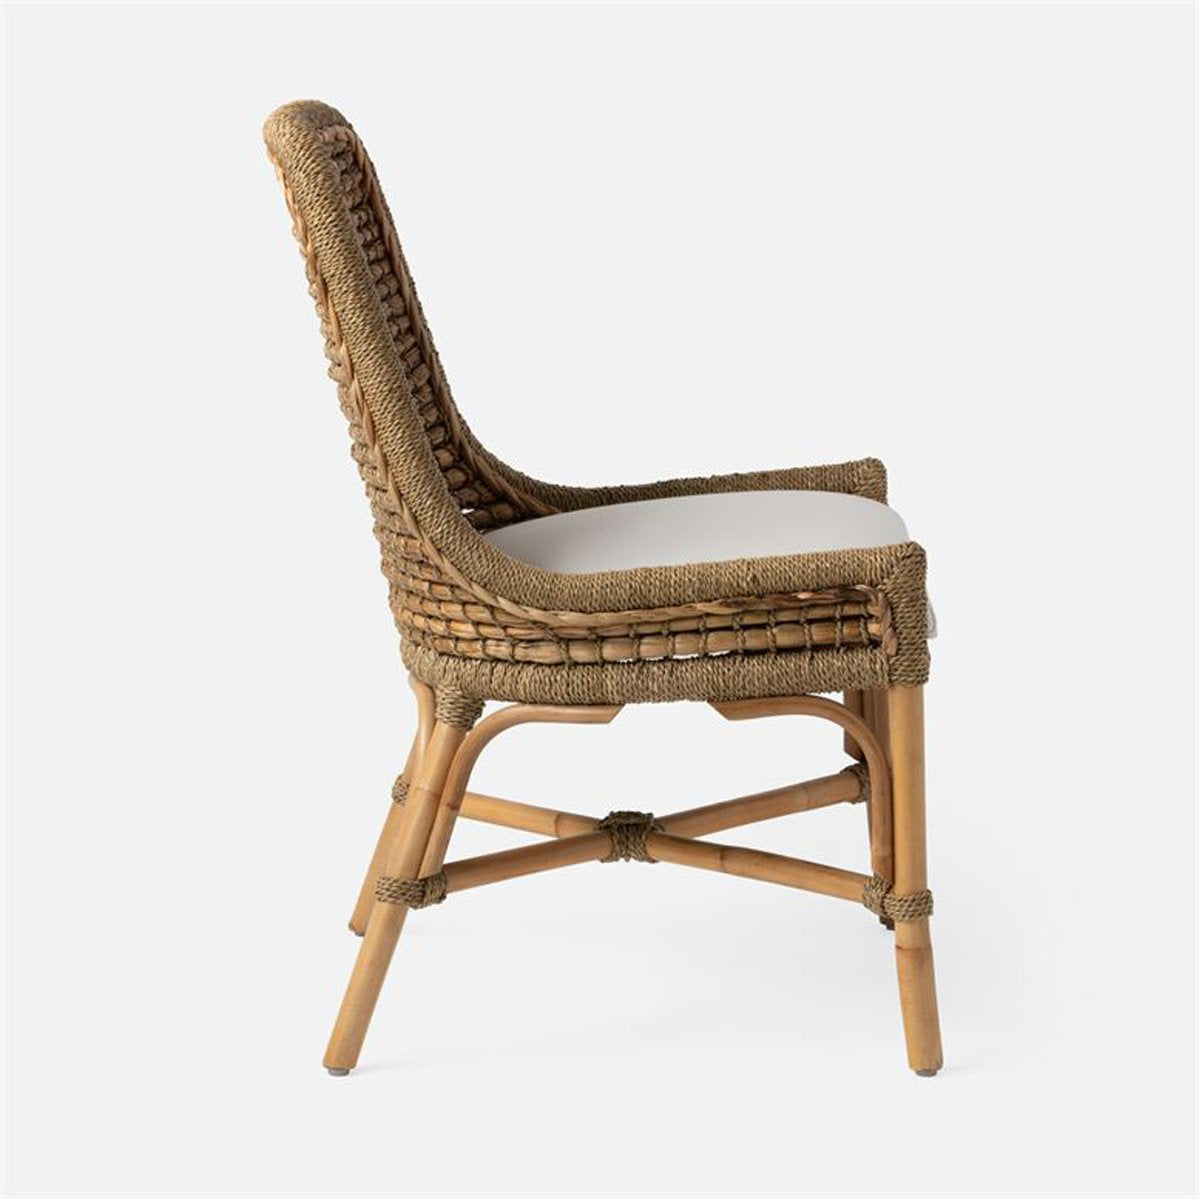 Made Goods Summer Water Hyacinth Dining Chair in Bassac Shagreen Leather